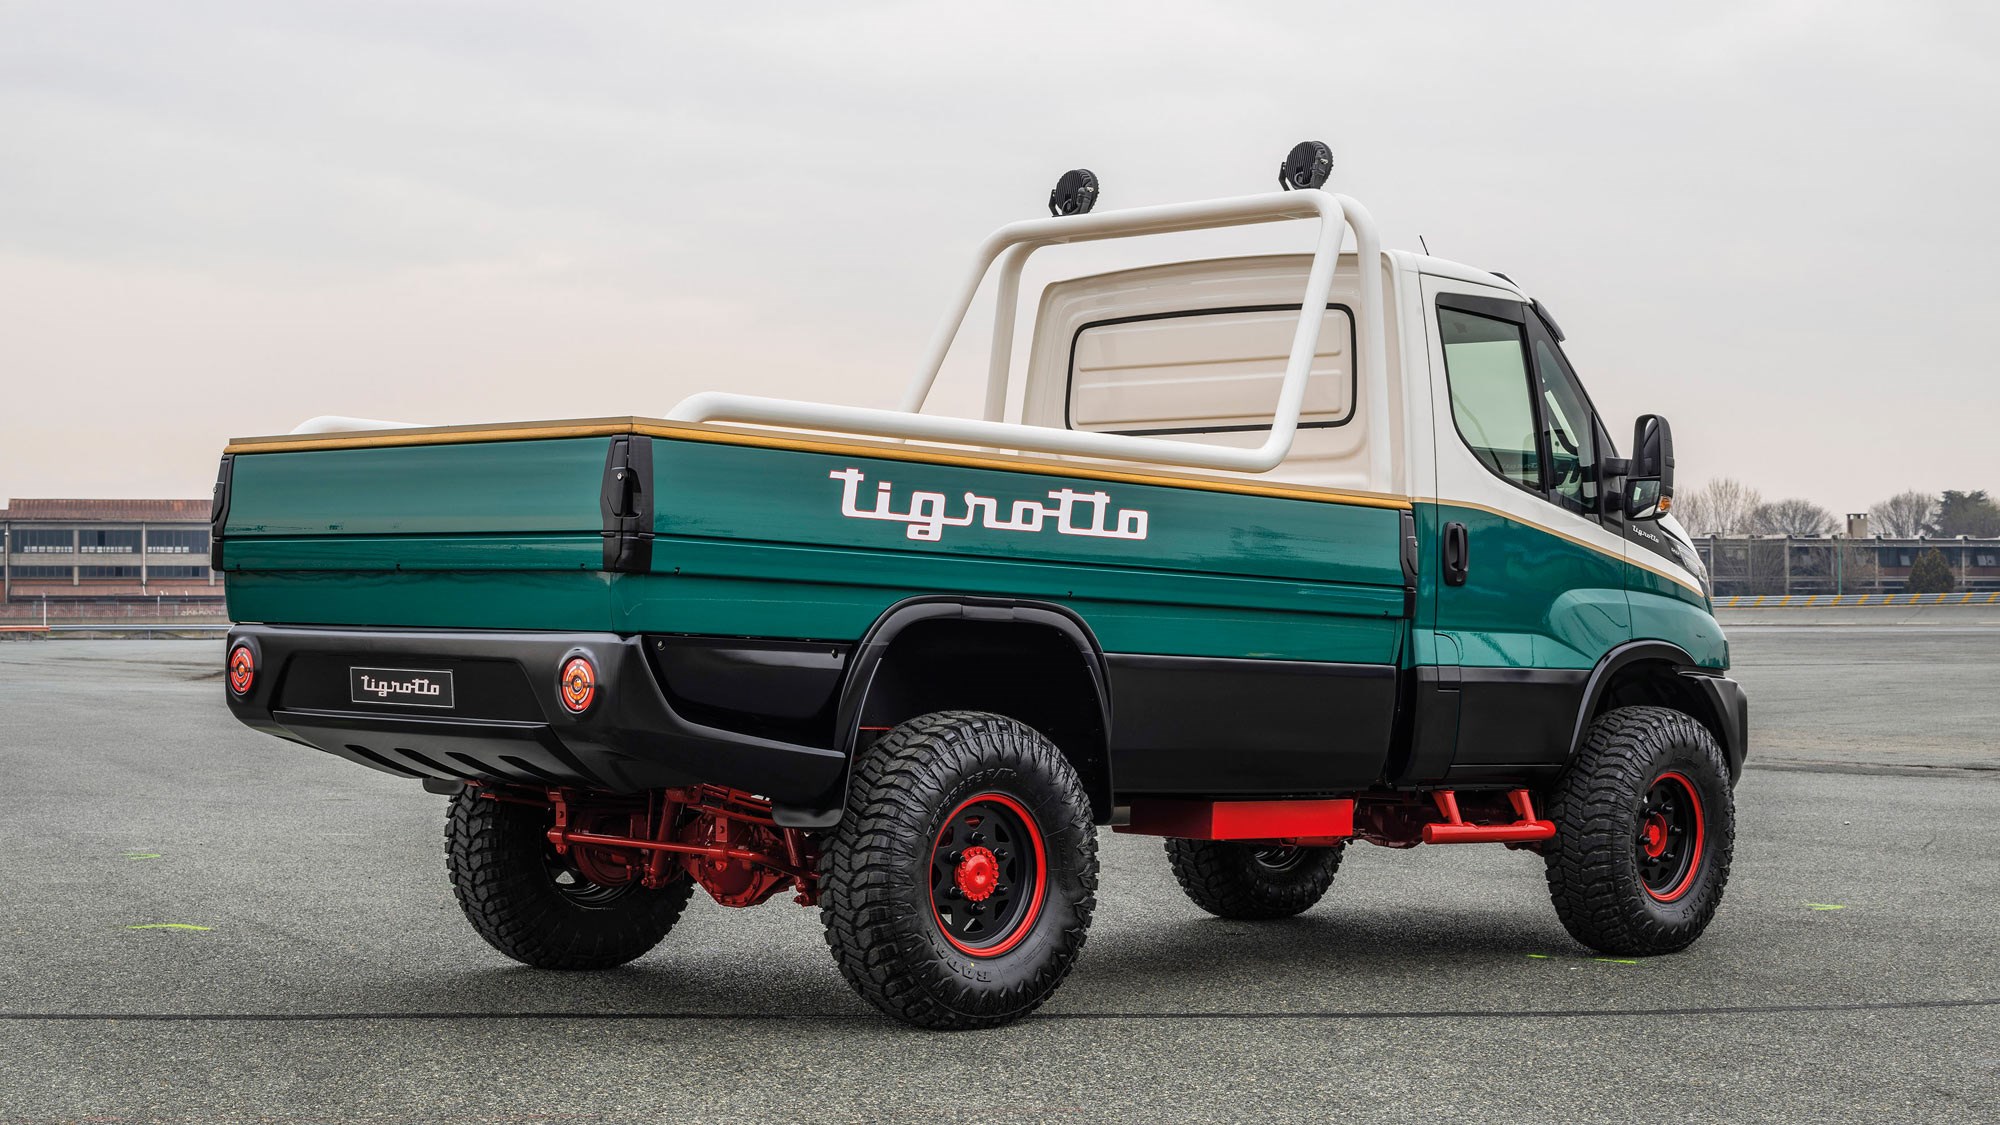 Iveco Daily 4x4 Tigrotto: the retro off-road van you didn't know